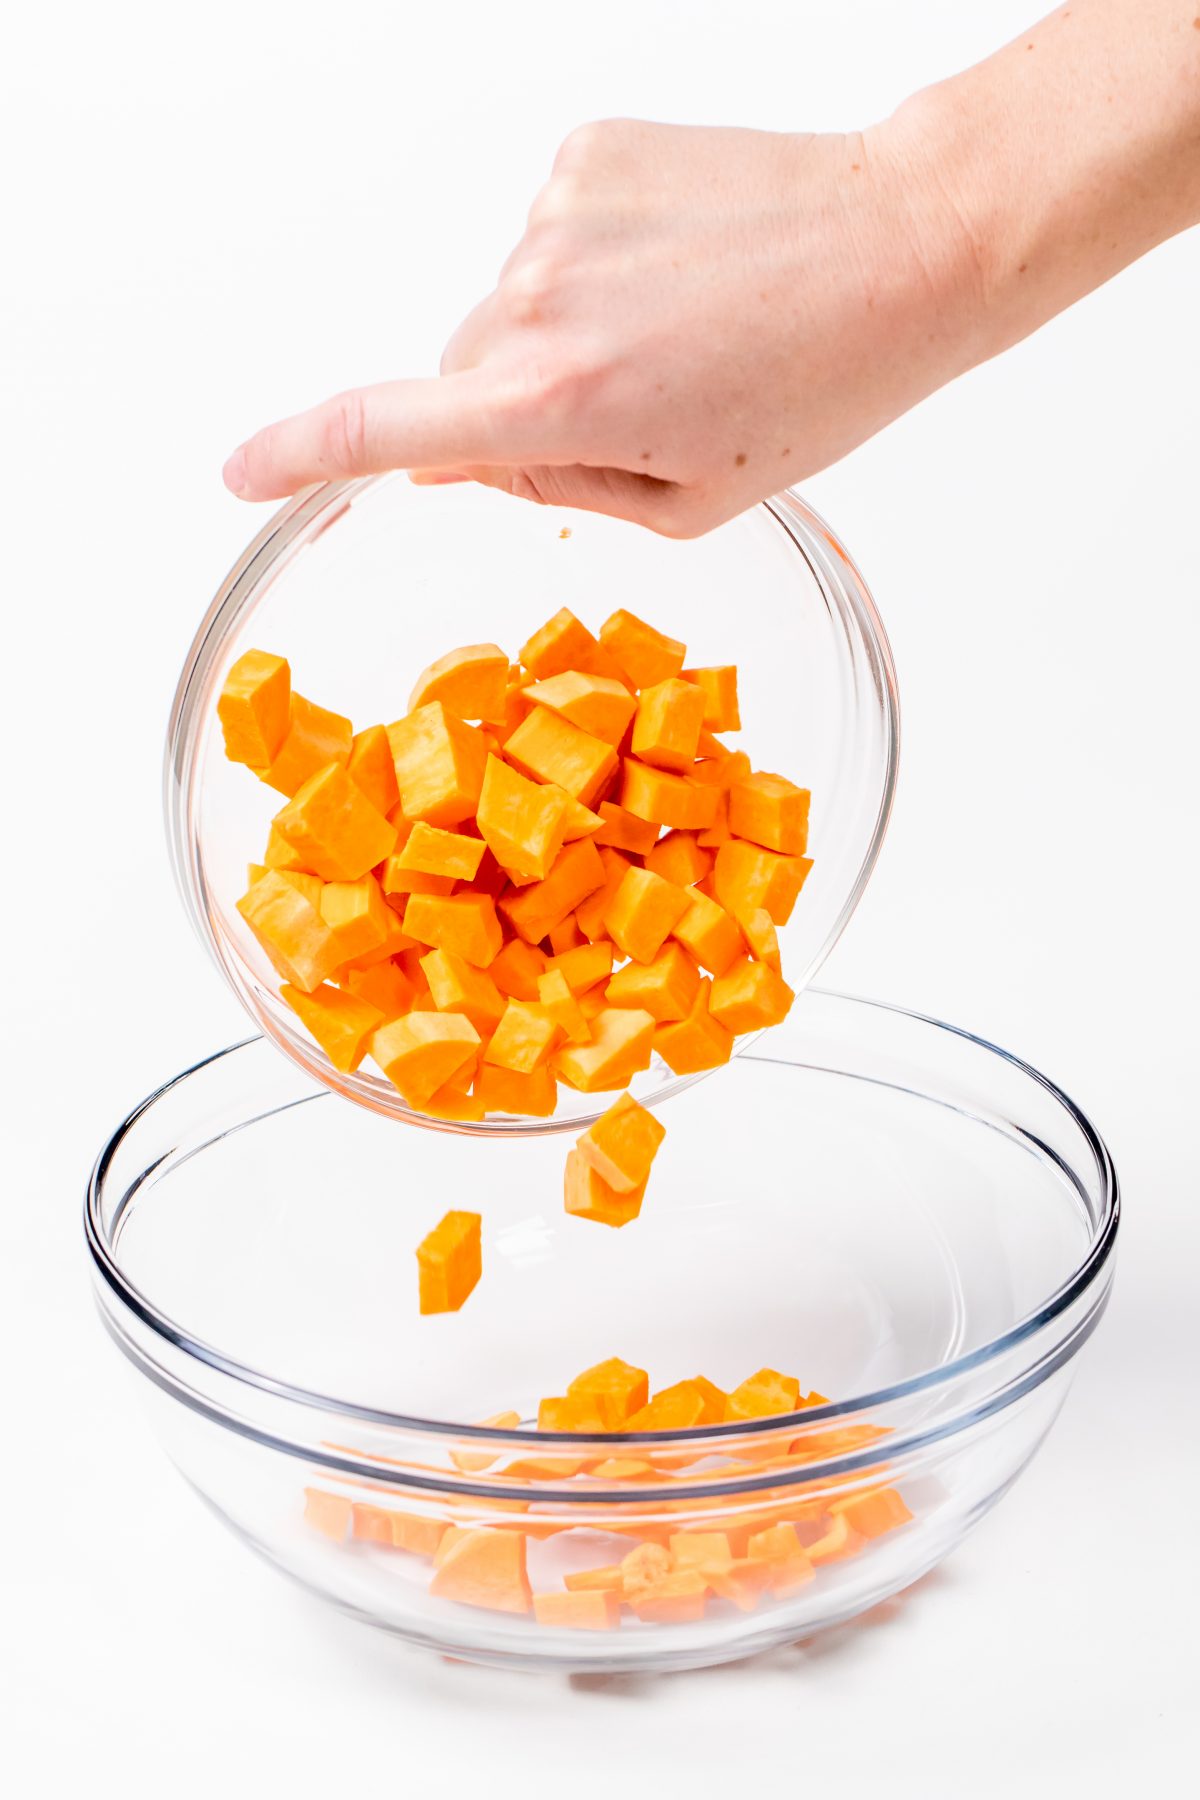 Add cubed sweet potato to bowl